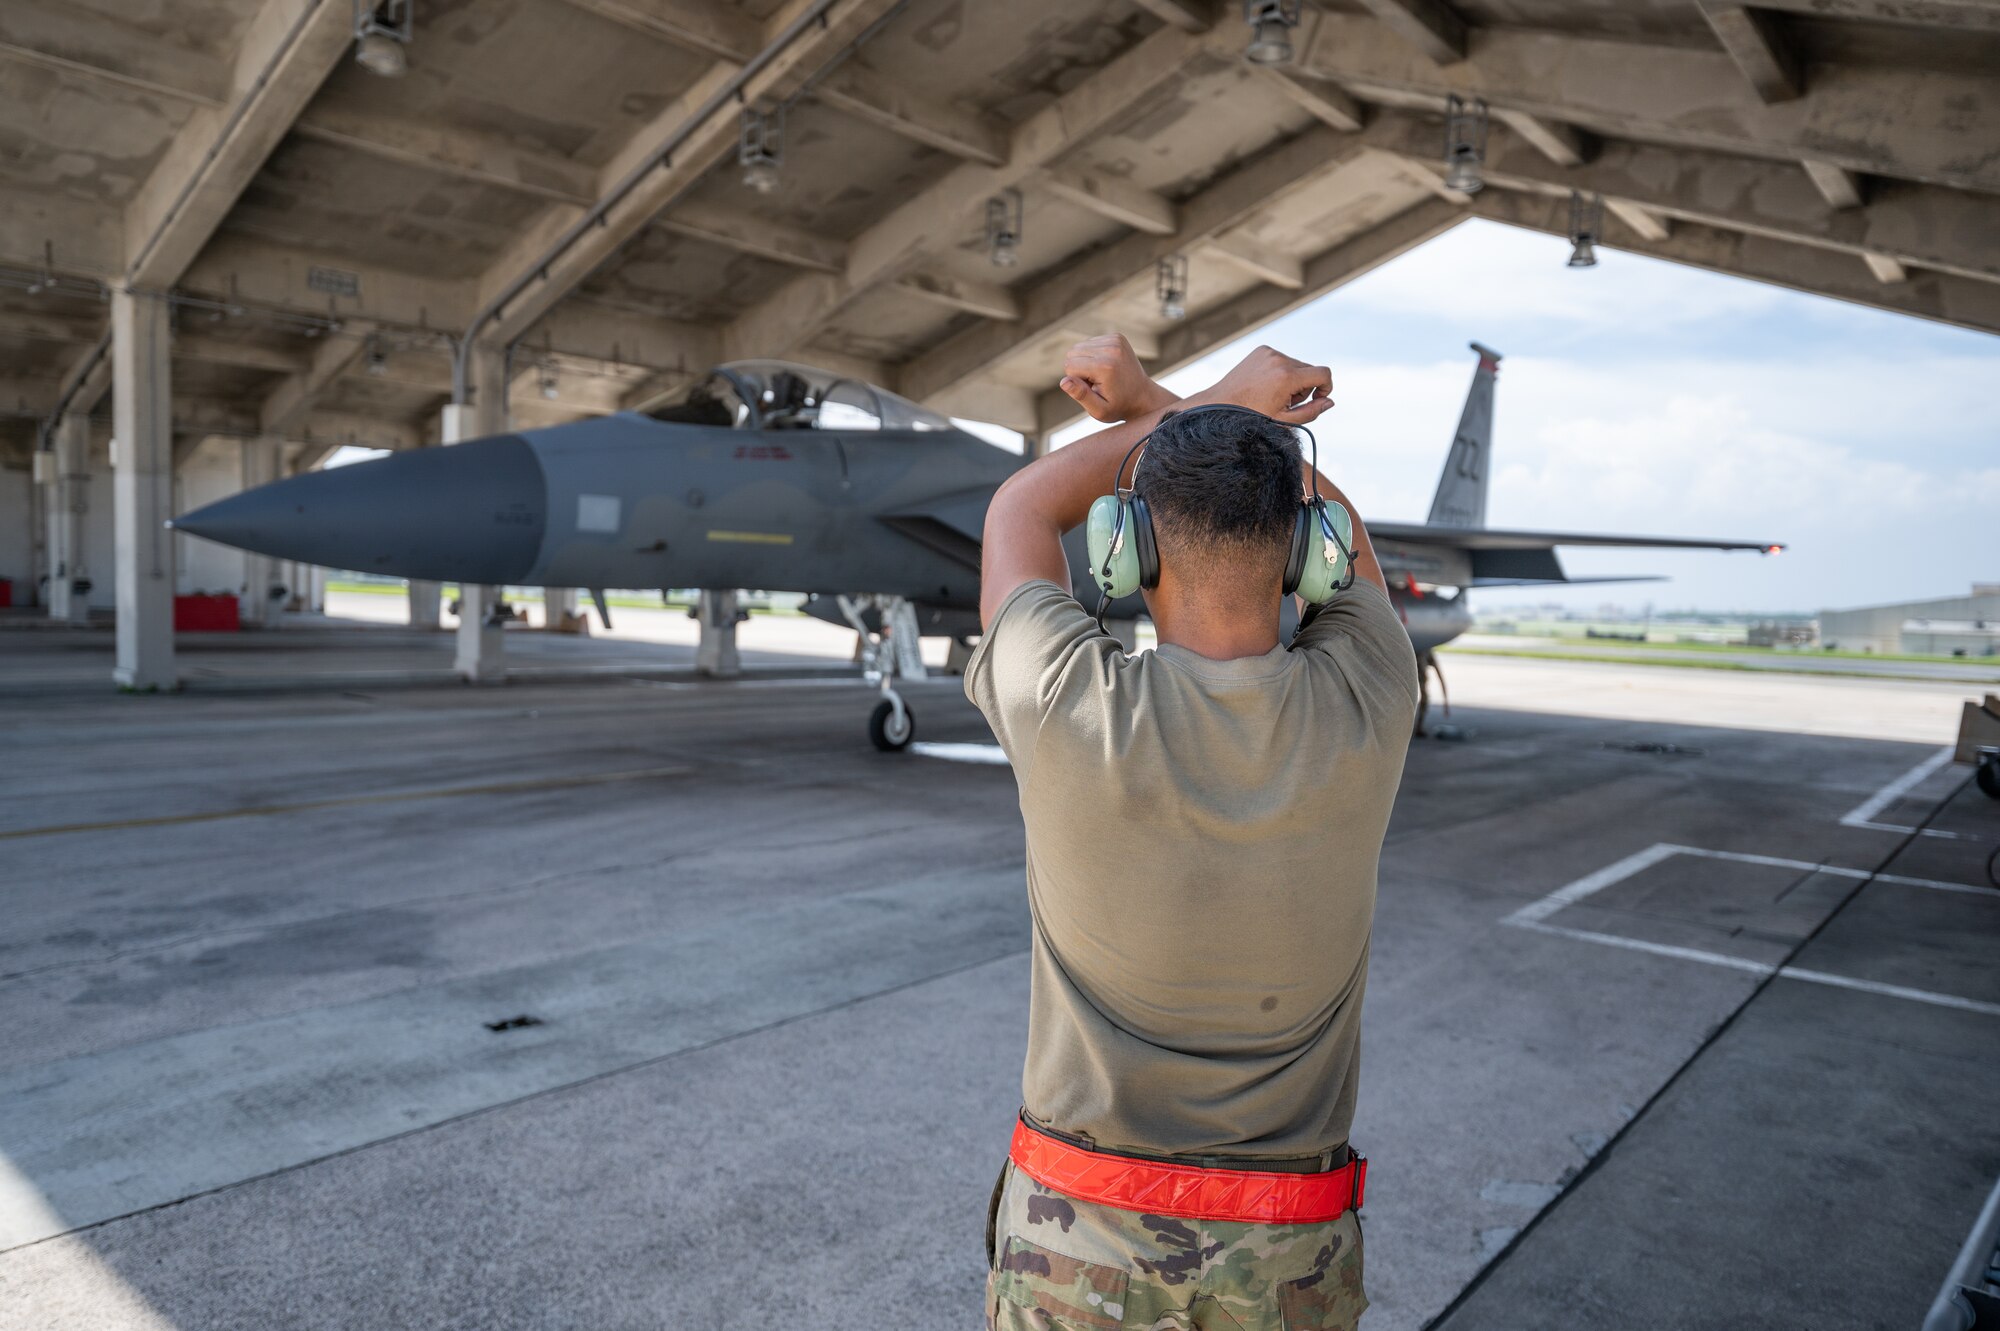 U.S. Air Force Airman 1st Class Joel Hernandez, 67th Aircraft Maintenance Unit crew chief, conducts preflight checks on an F-15C Eagle at Kadena Air Base, Japan, Sept. 14, 2021. Crew chiefs are responsible for day-to-day maintenance, including end-of-runway, postflight, preflight, thru-flight, special inspections and phase inspections. (U.S. Air Force photo by Airman 1st Class Stephen Pulter)